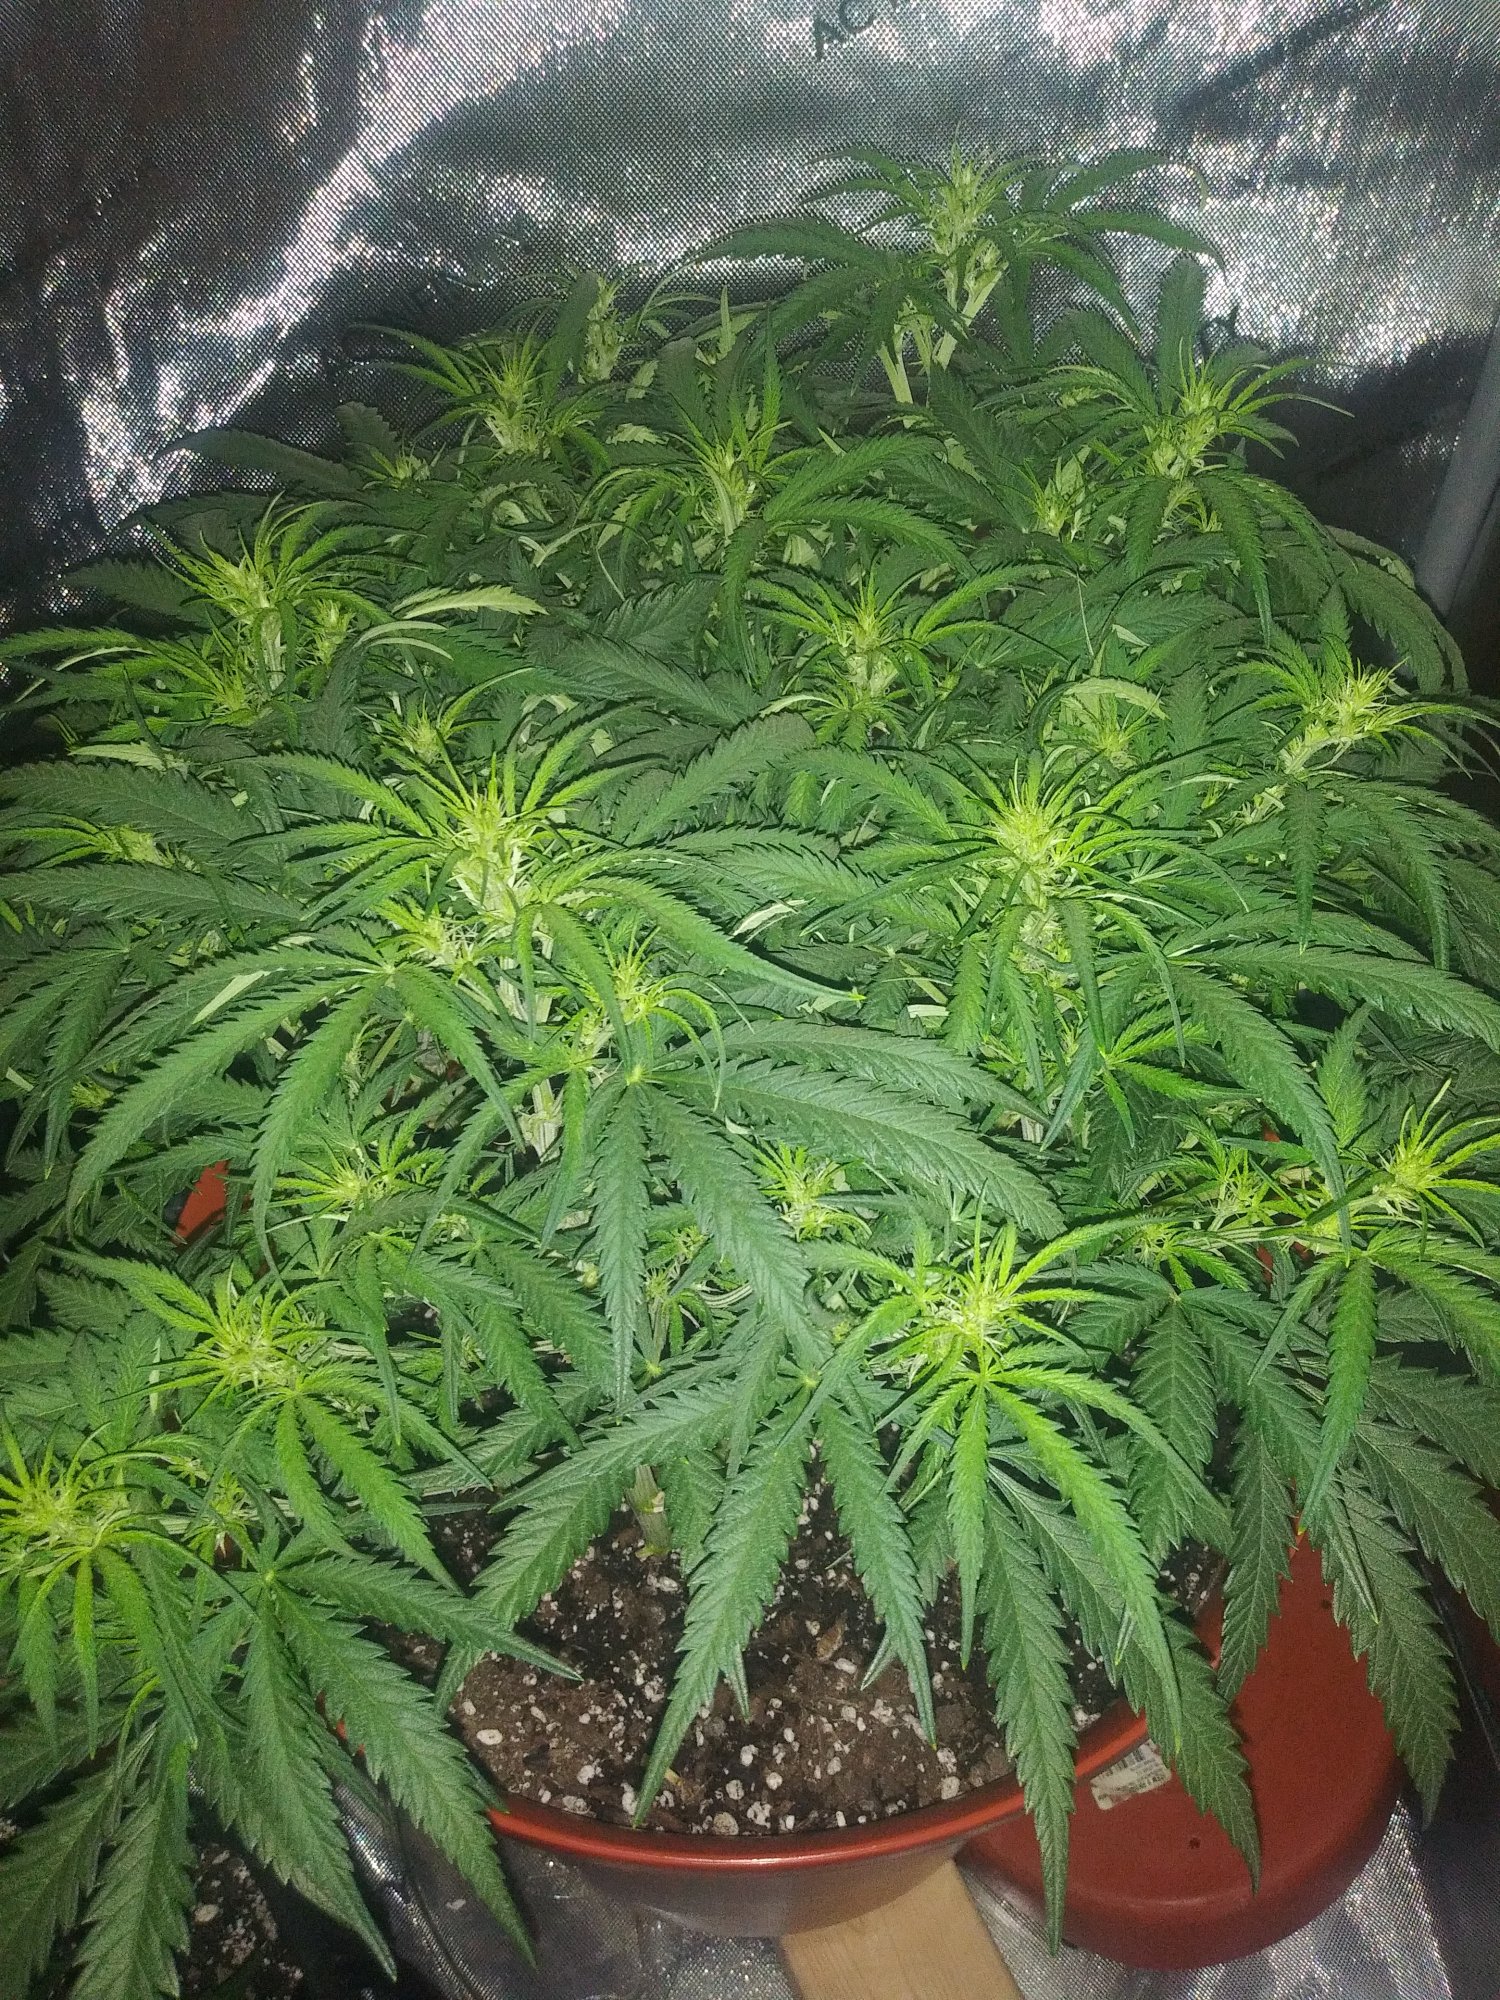 Some experienced growers opinions please